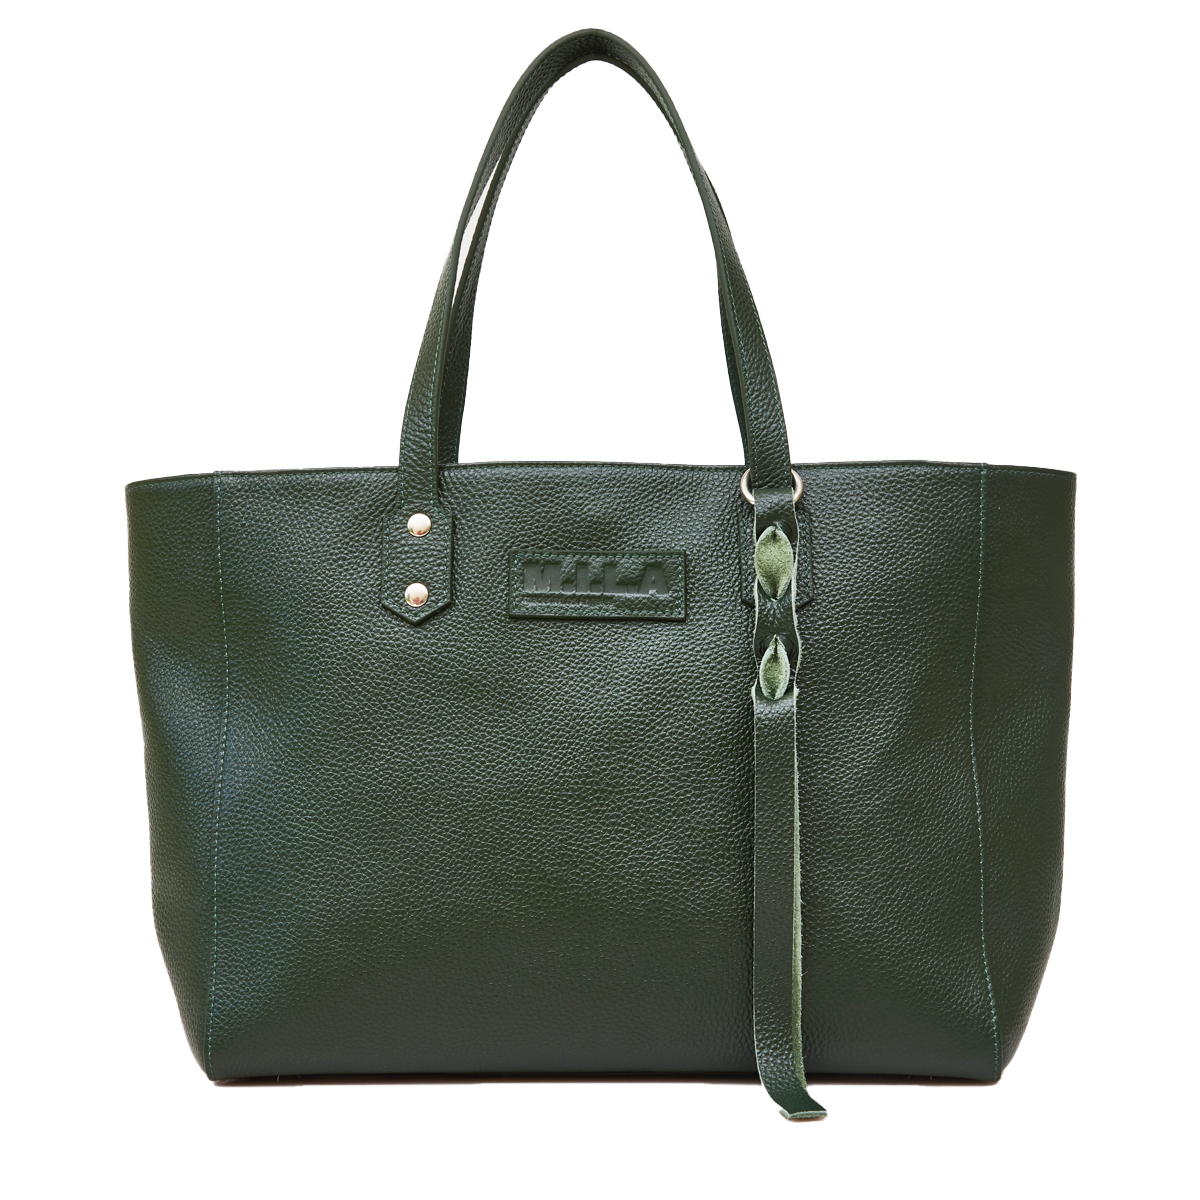 Shop Tote Leader Bags For Women On Sale online